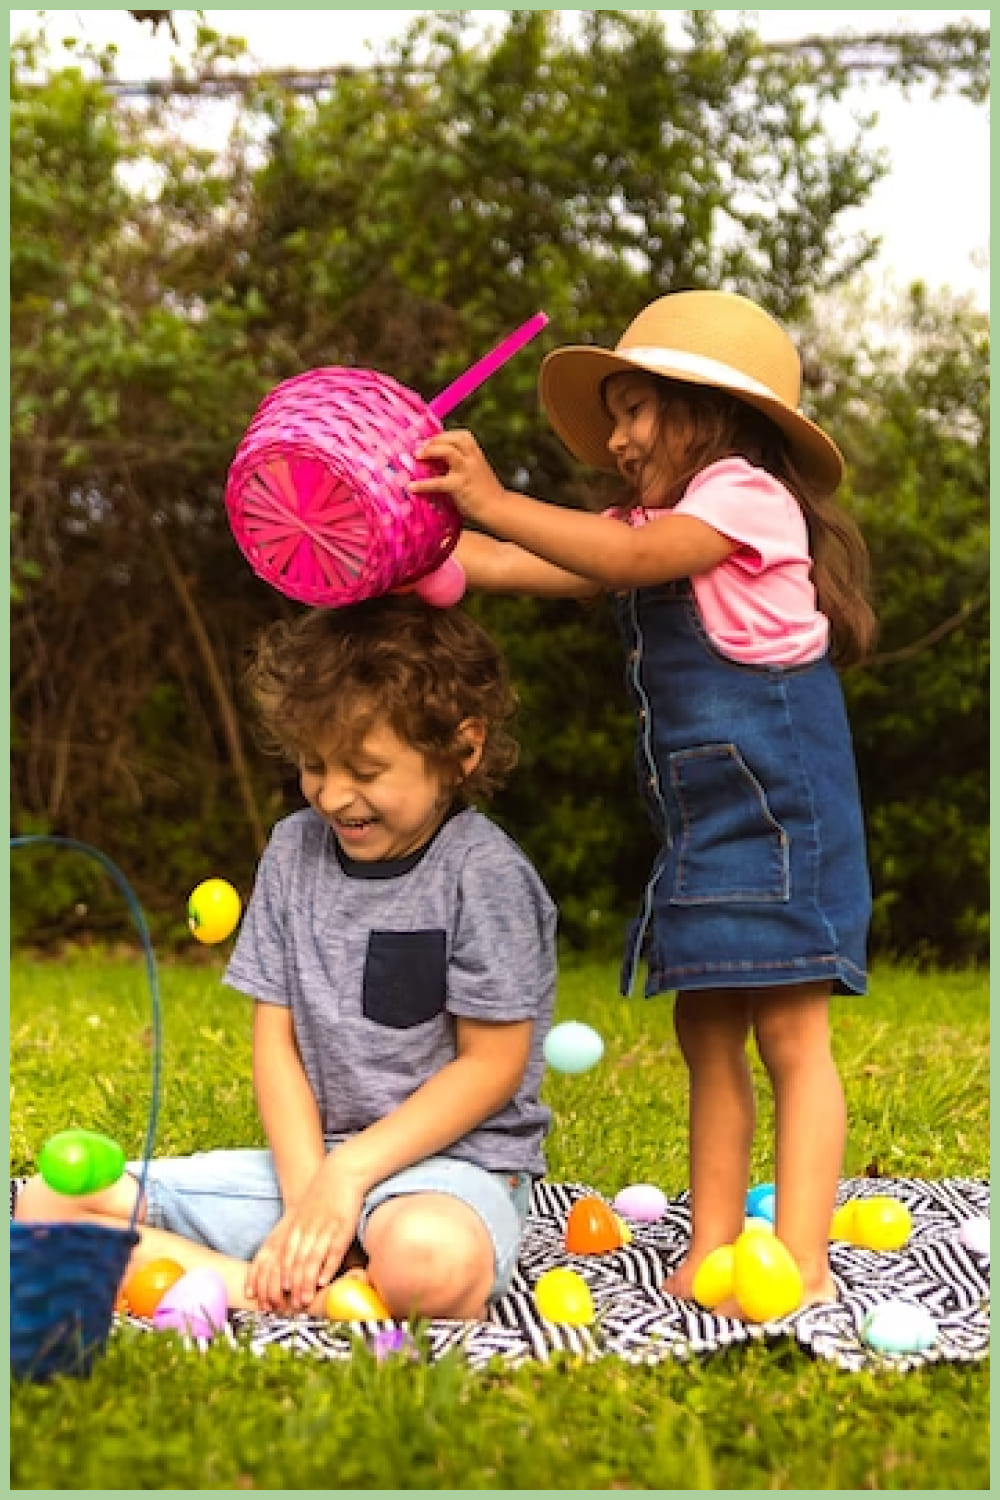 A boy sits on a mat and a girl stands over him with a pink basket.